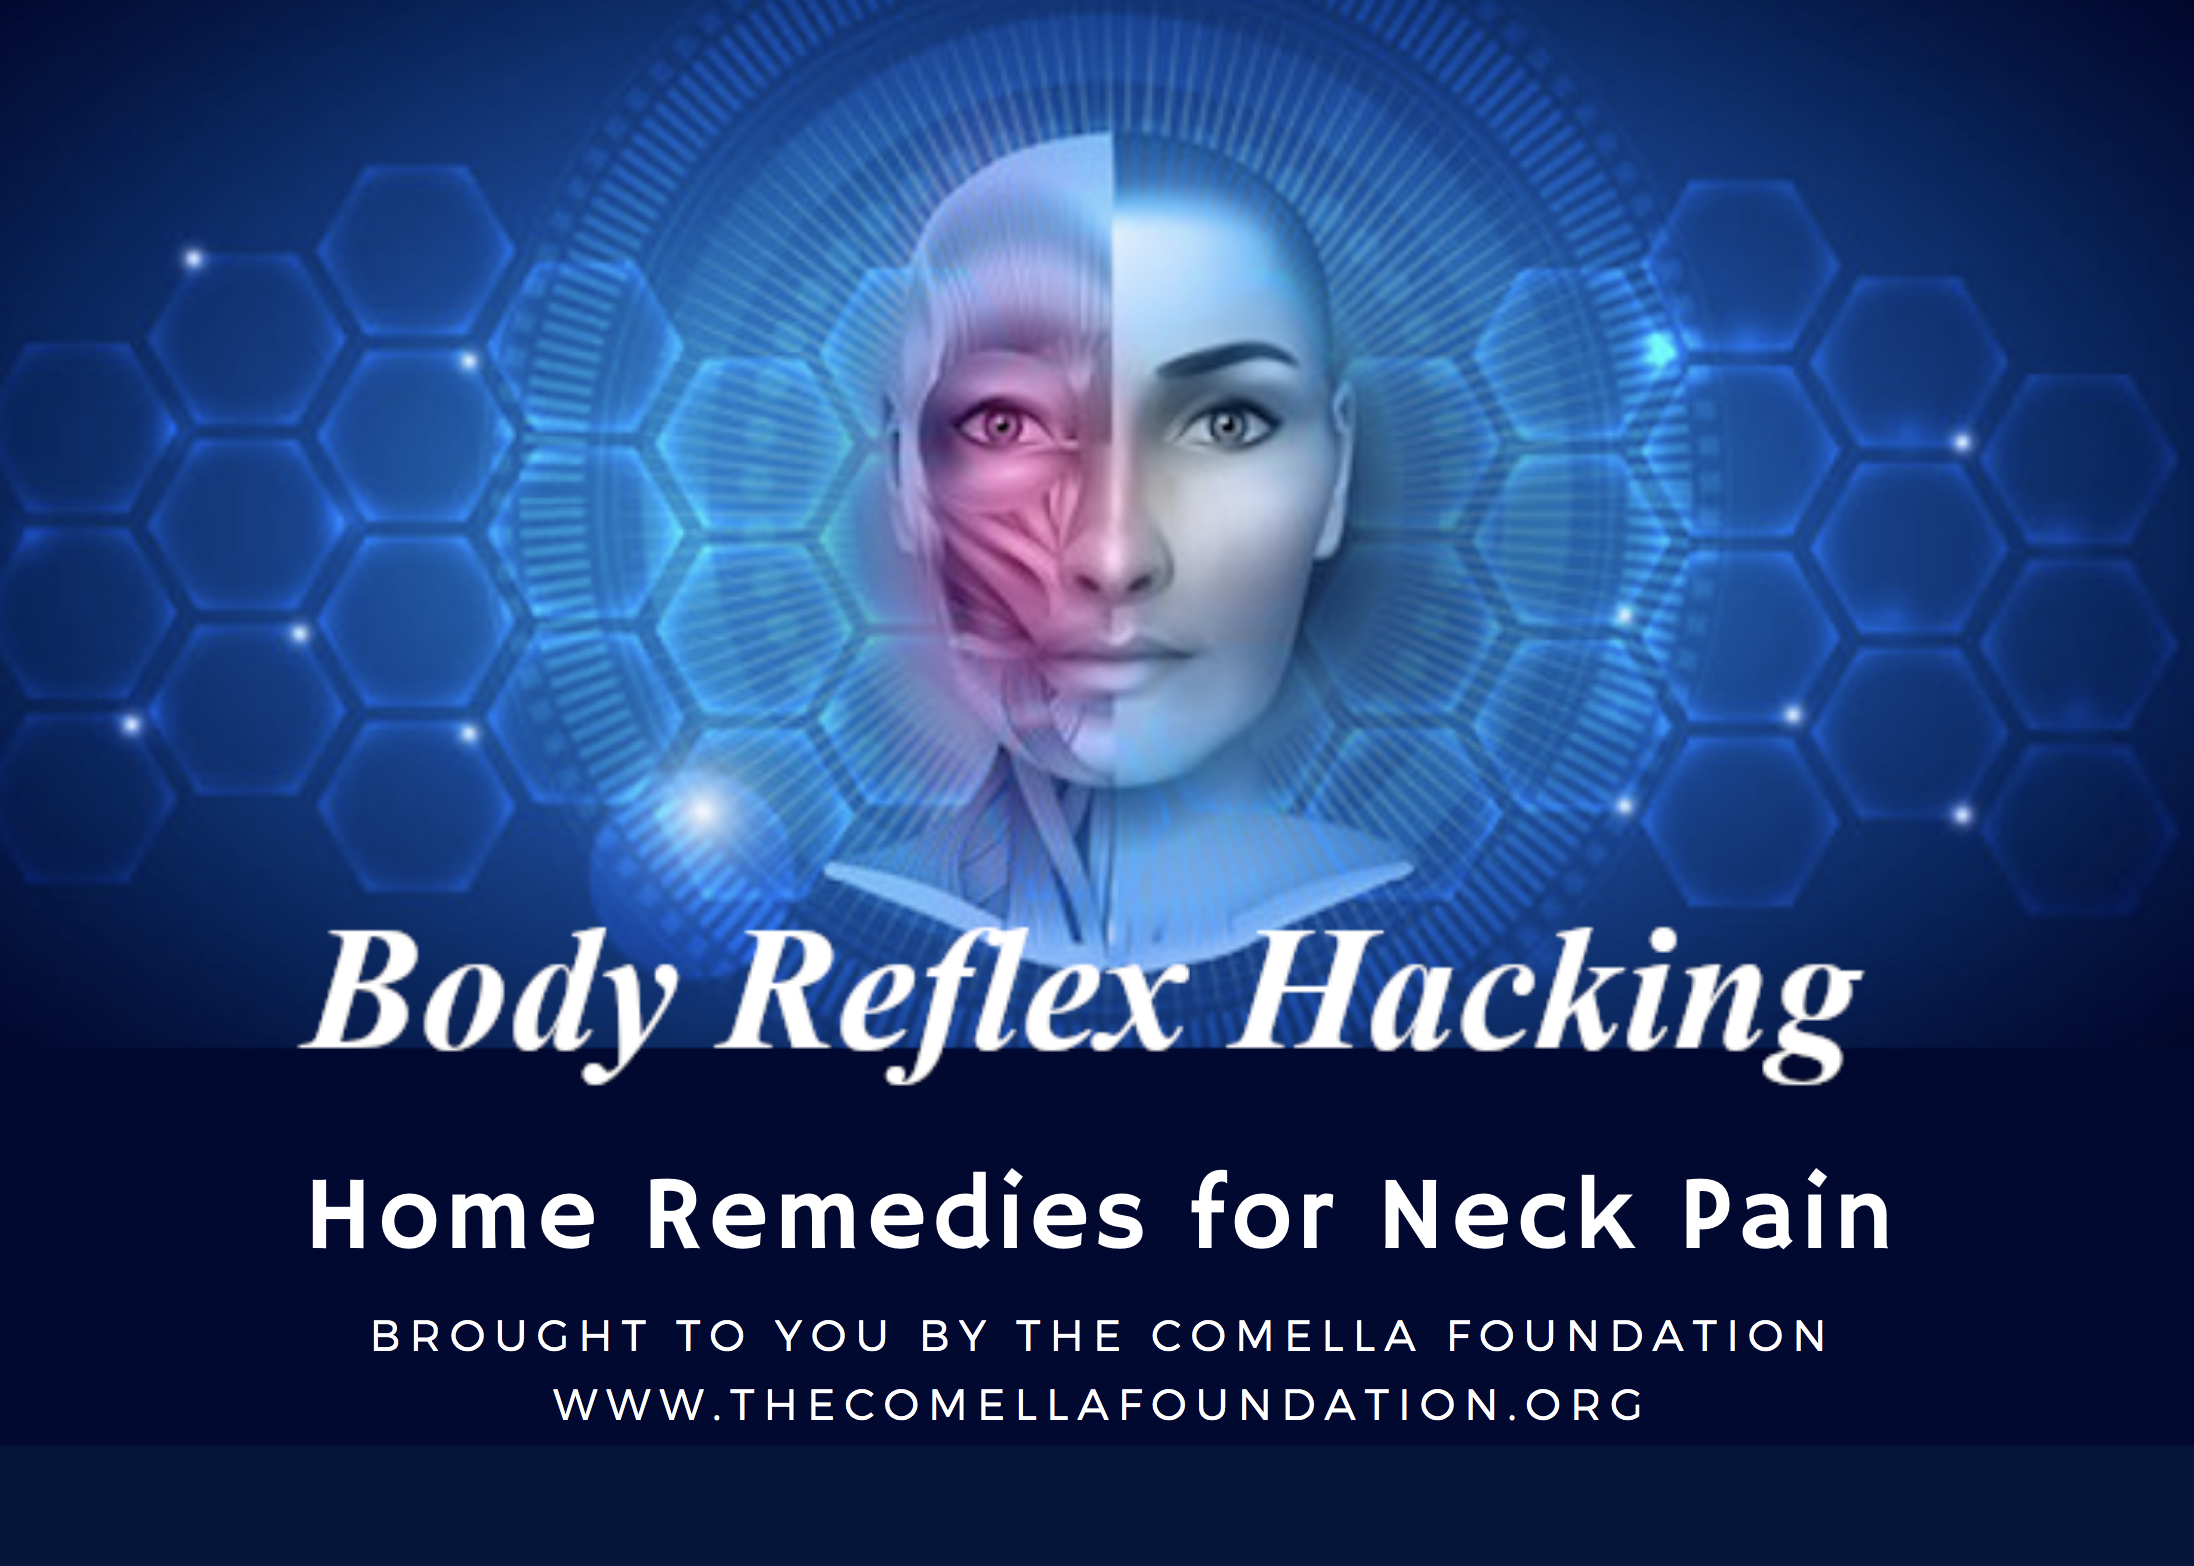 Body Reflex Hacking: Home Remedies for Neck Pain